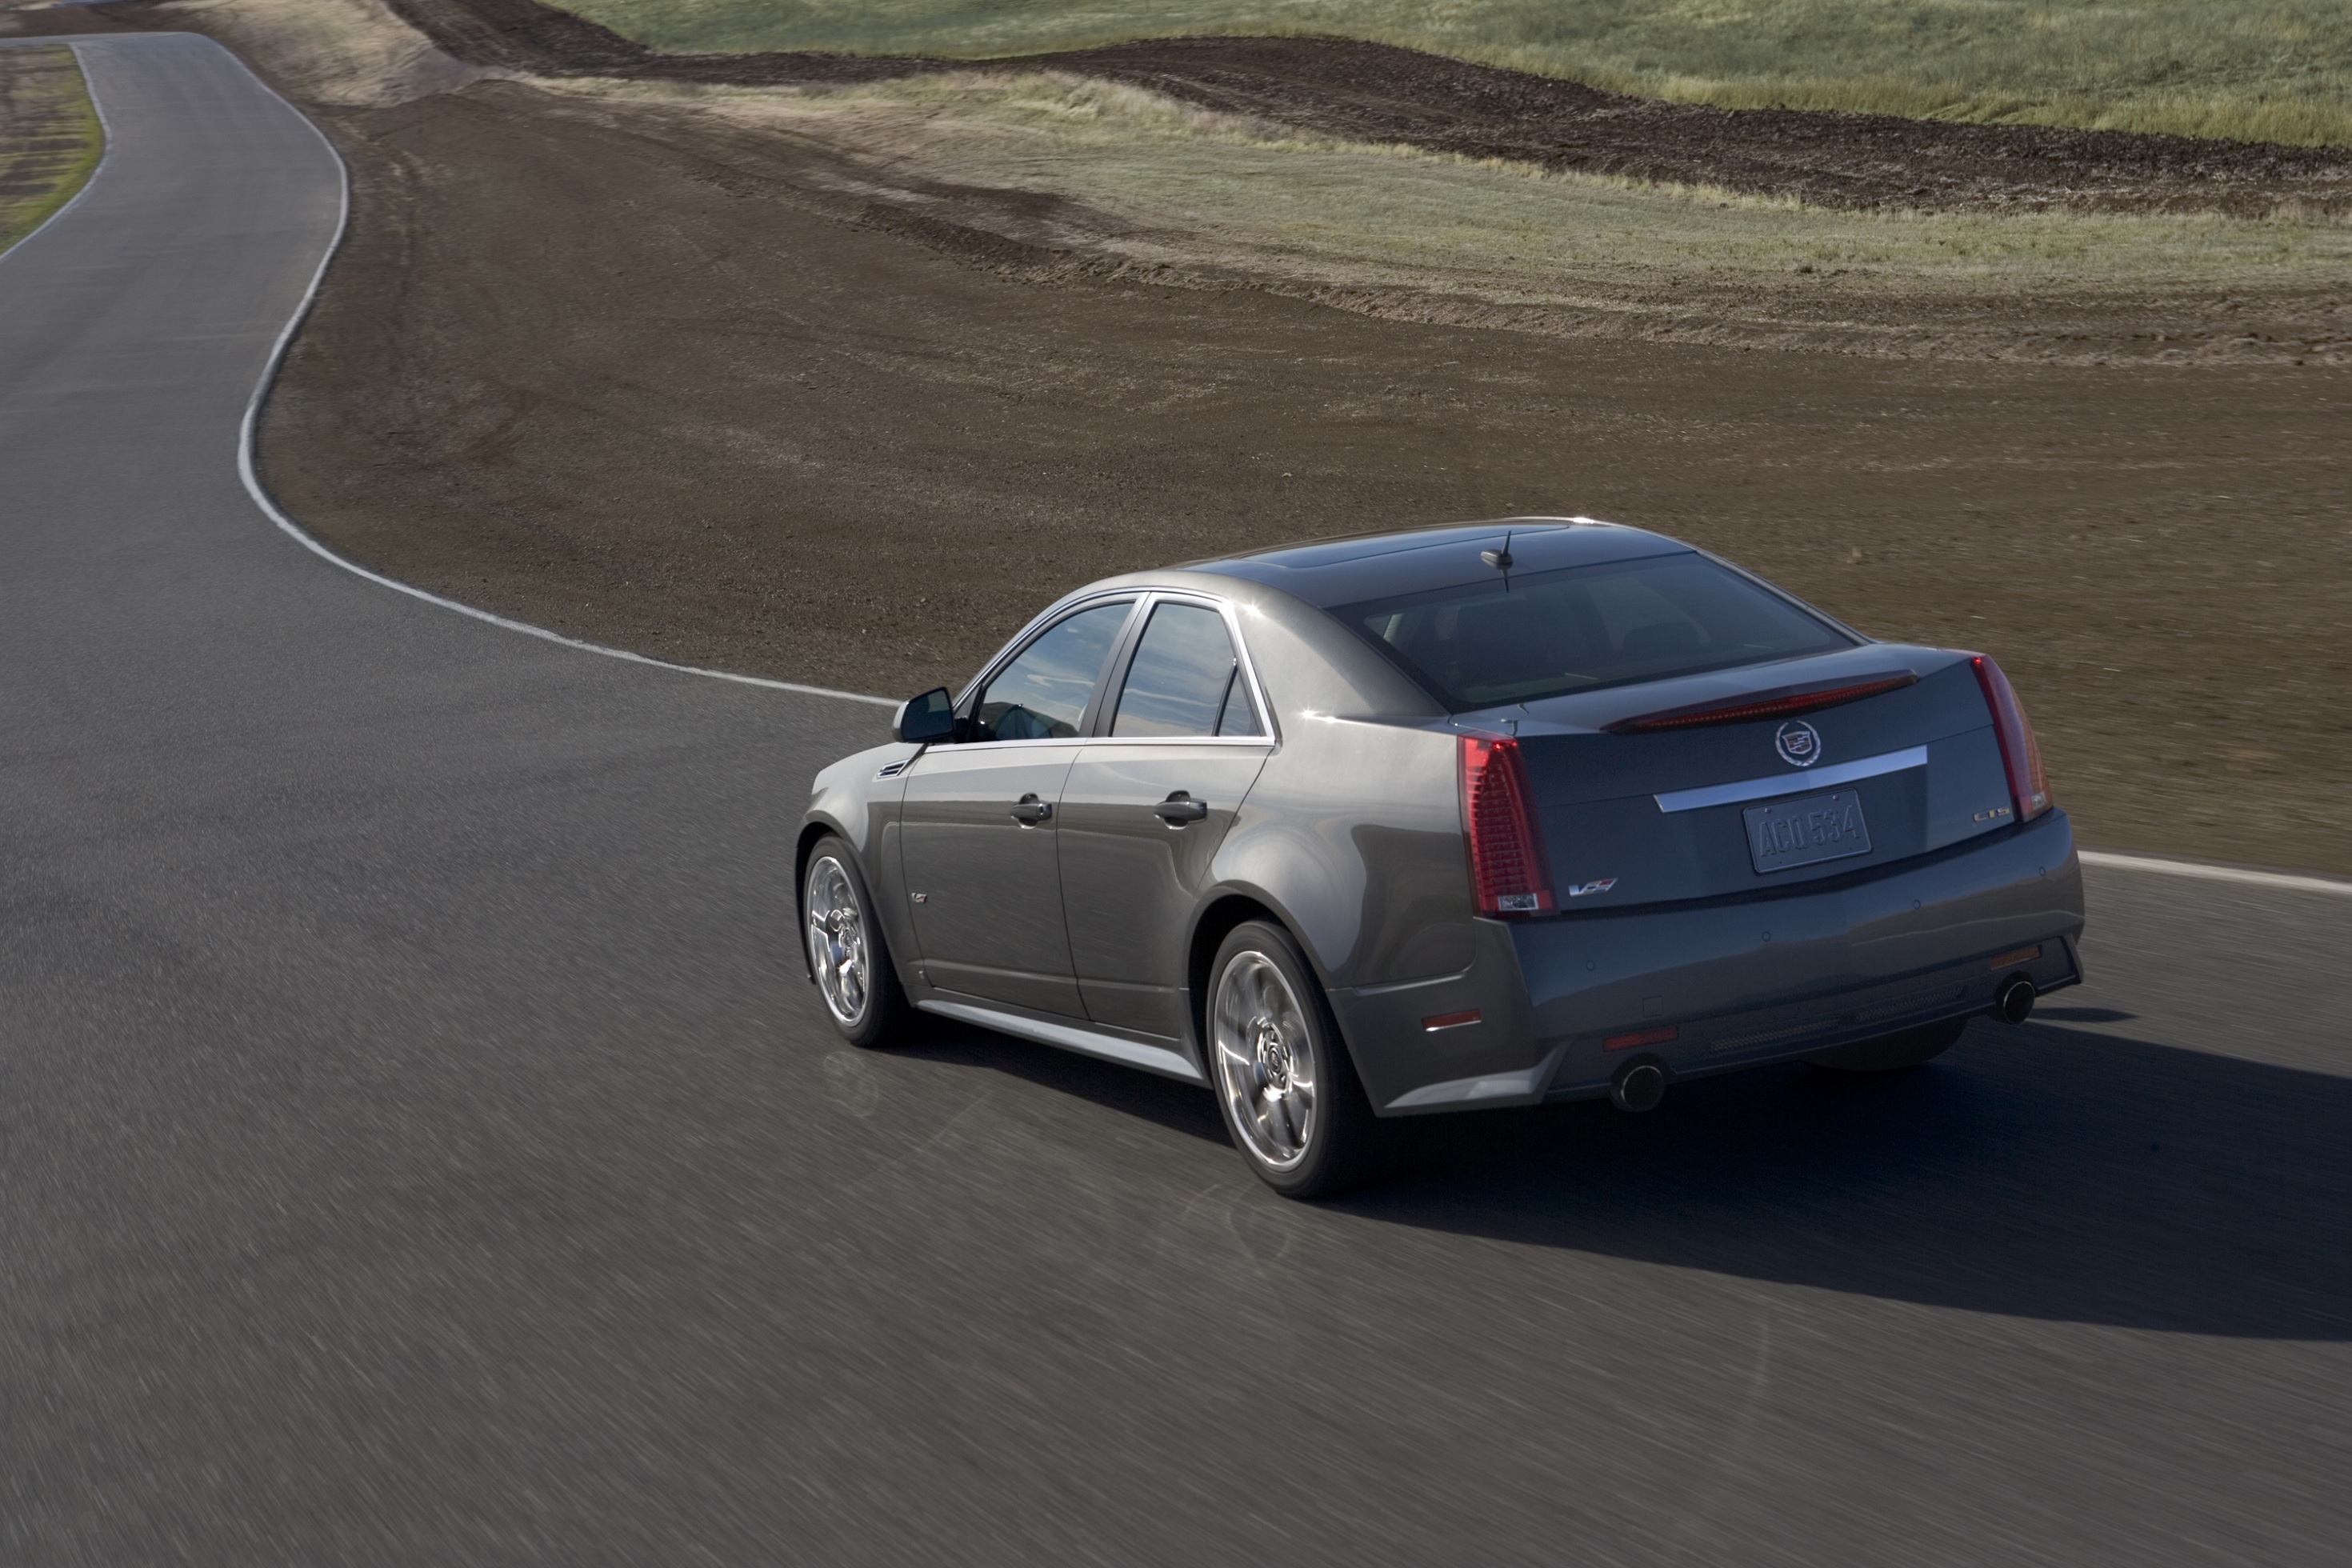 The 3/4 rear view of a gray 2011 Cadillac CTS-V Sedan driving down a racetrack